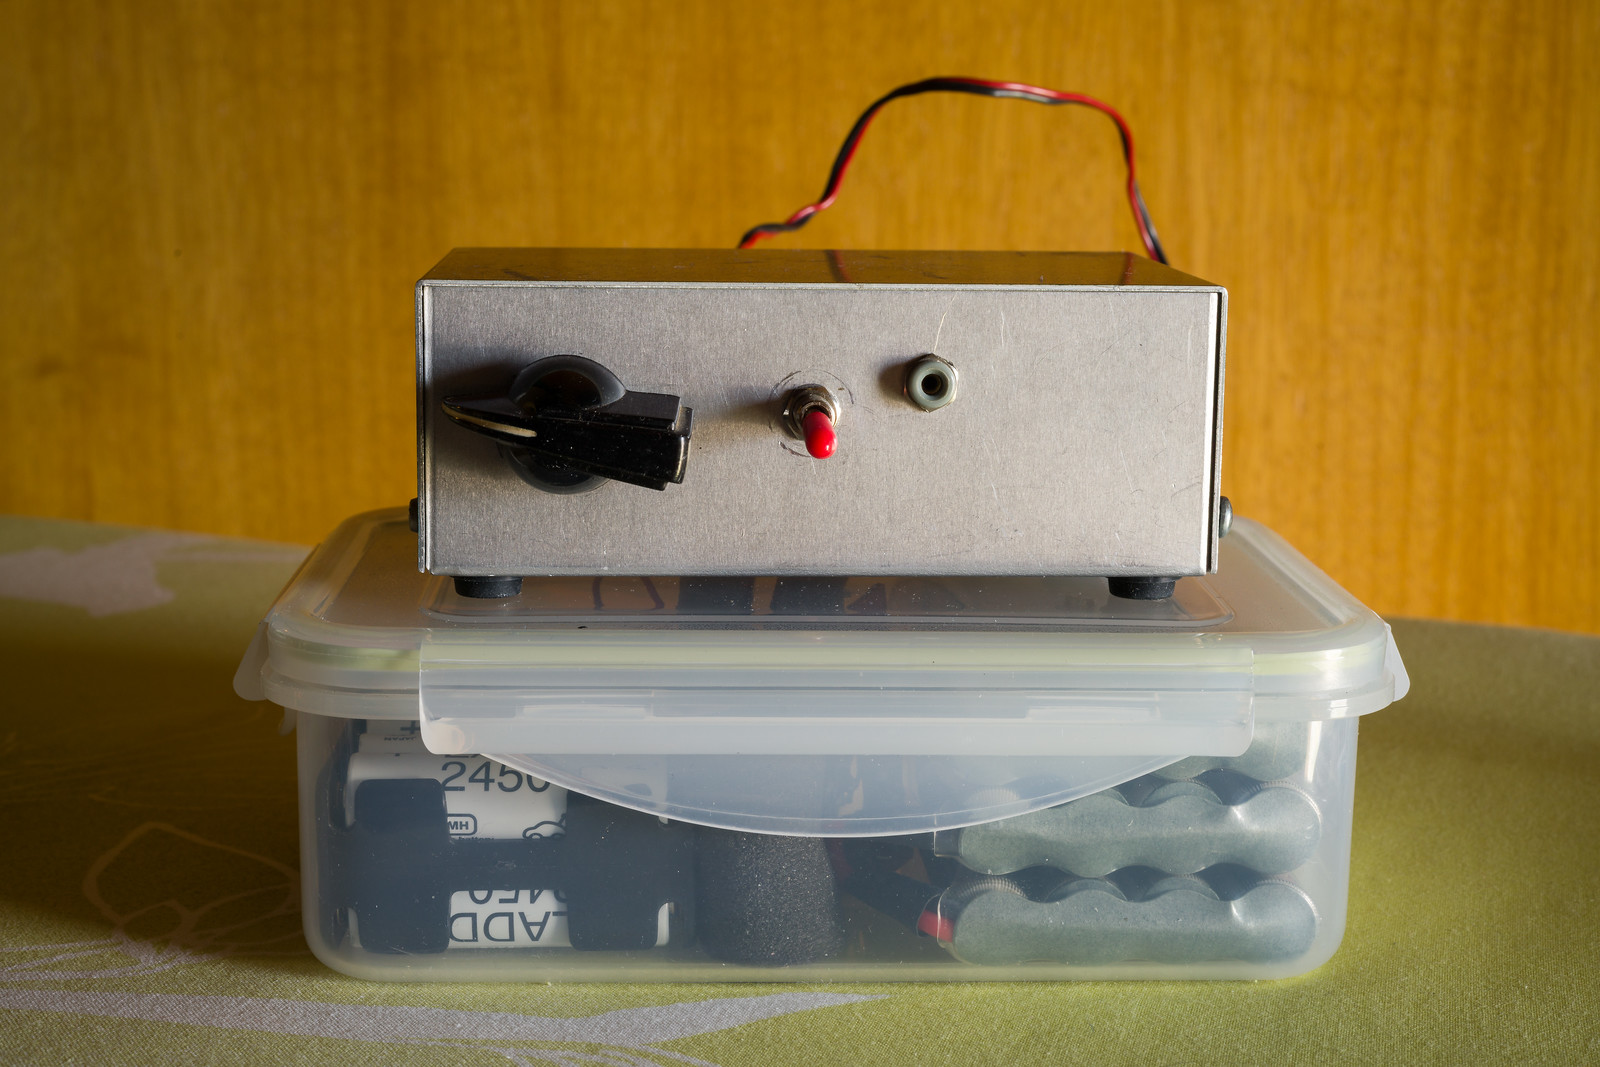 Control box with battery block underneath